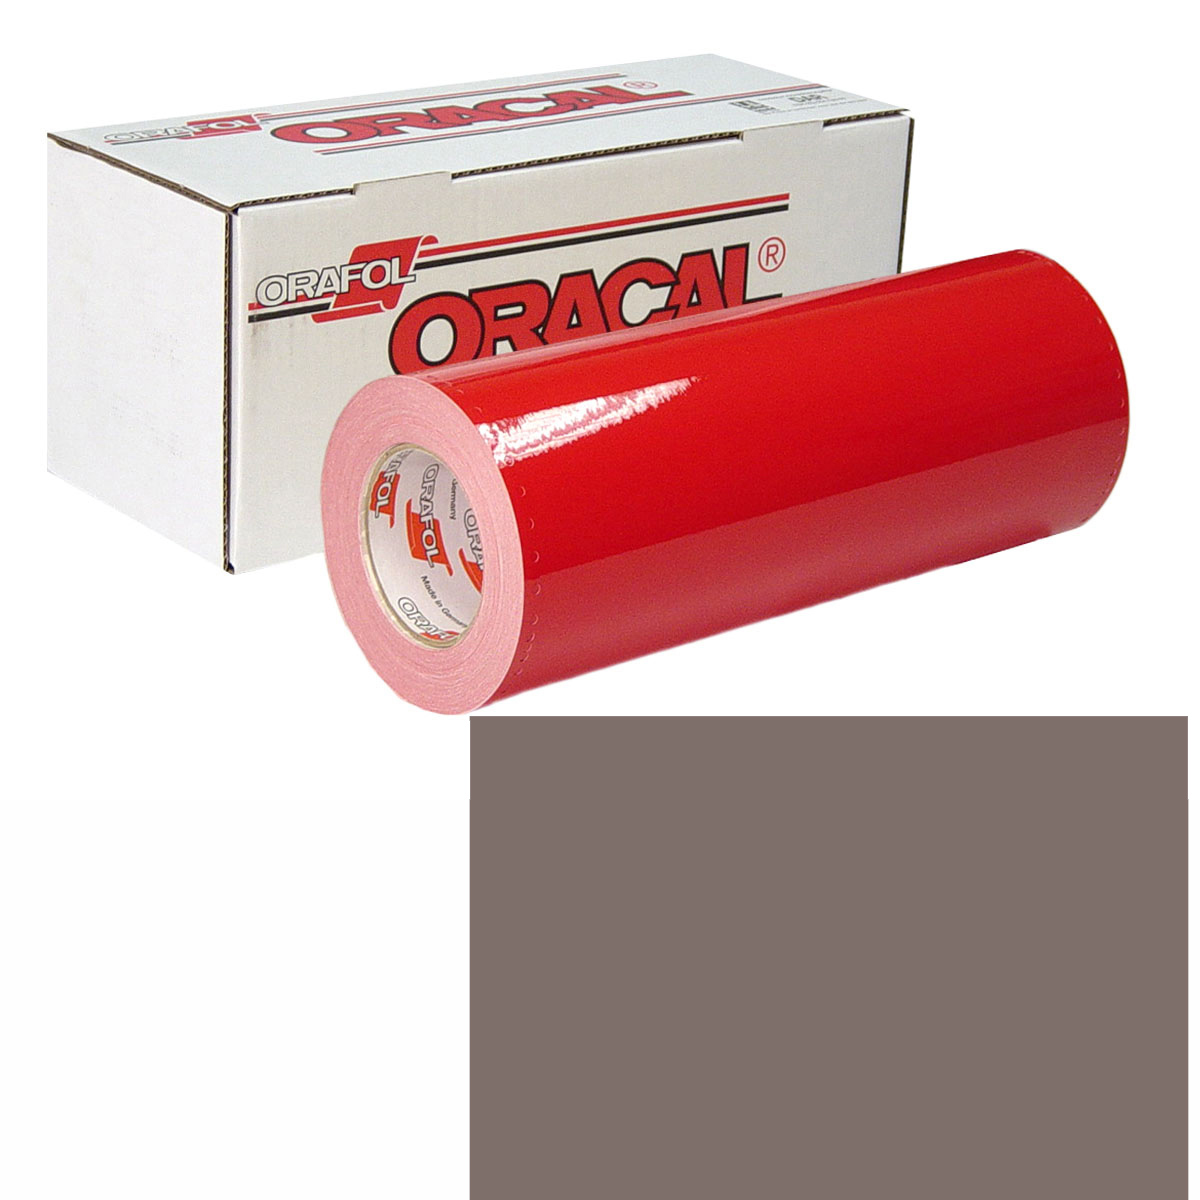 ORACAL 951 15in X 50yd 080 Brown